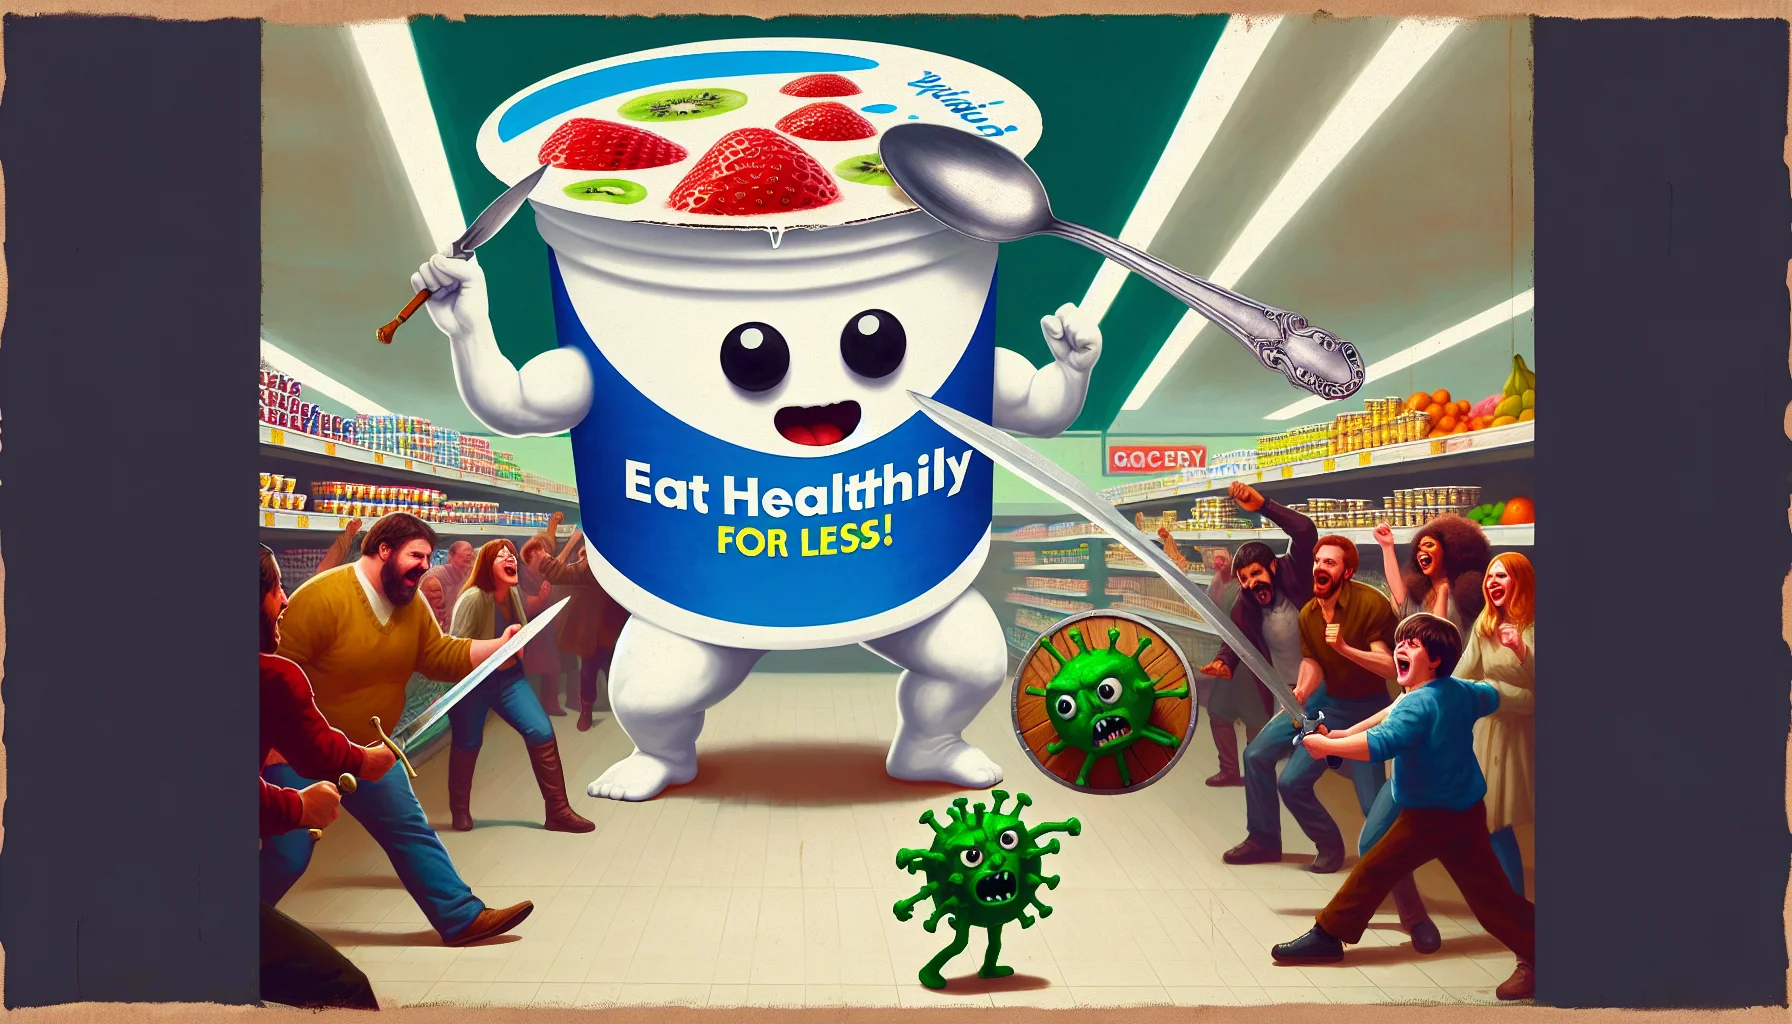 Picture a comical scenario. A gargantuan yogurt pudding in the center of the image, seemingly battling a menacing flu virus, symbolized as a tiny green creature with a frightened expression. The pudding is equipping a spoon sword and a shield made of healthy fruit. There is an overlaid text saying 'Eat Healthily For Less!' The background is a grocery store scene with people of various descents and genders, all laughing and cheering for the yogurt pudding. Everything seems exaggerated to highlight the humor and playfulness, yet the artwork retains a sense of realism in its details.